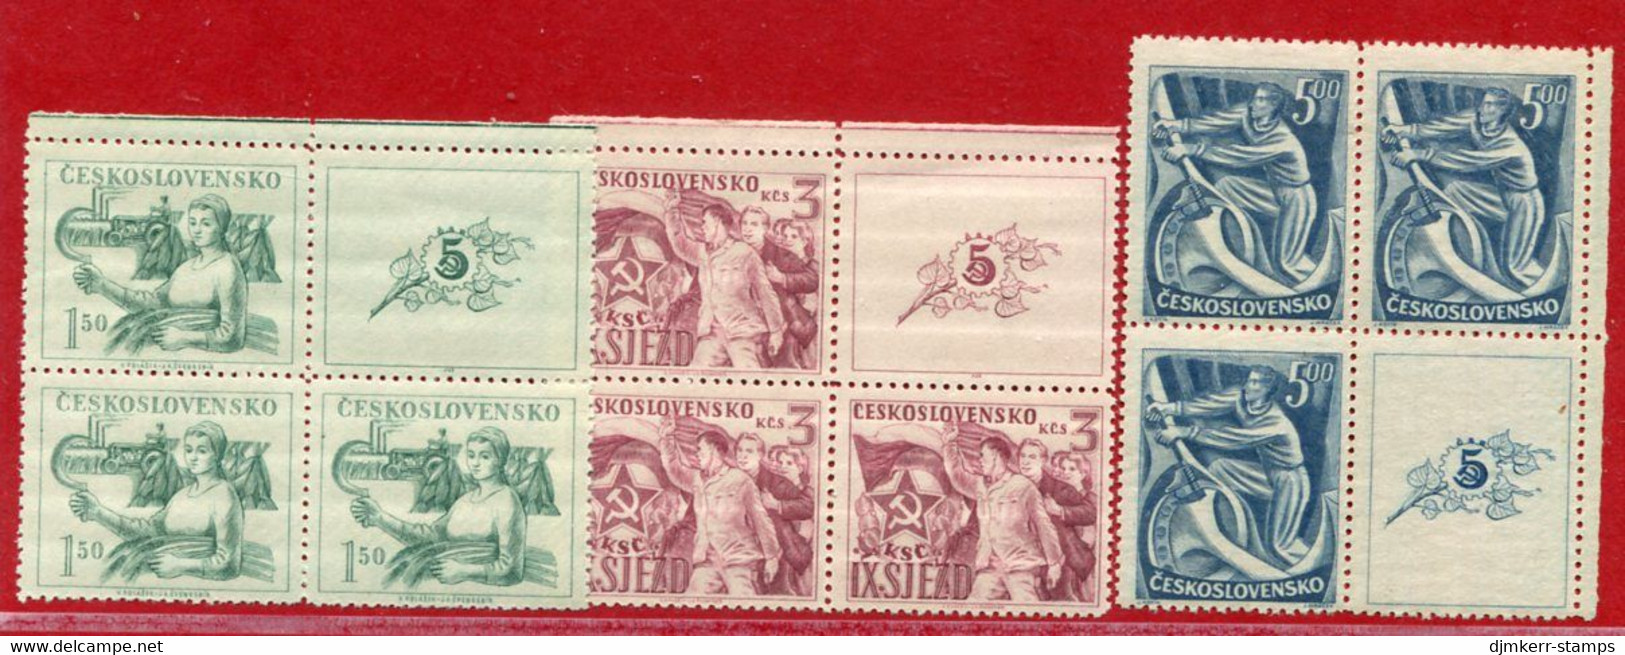 CZECHOSLOVAKIA 1949 Communist Party Congress Blocks Of 3 With Labels MNH / **.  Michel 575-77 Zf - Unused Stamps